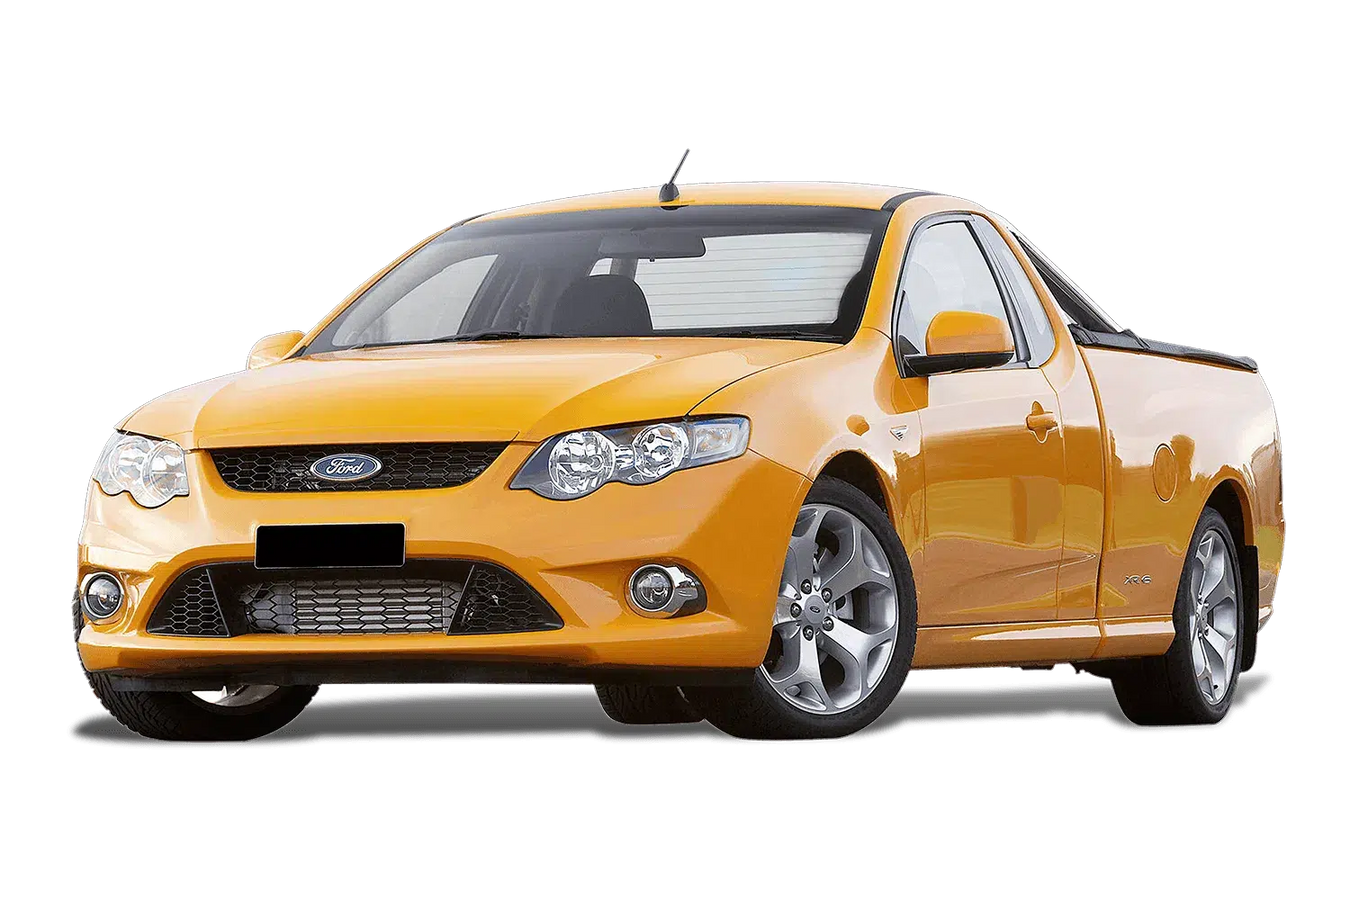 Seat Covers For Ford Falcon